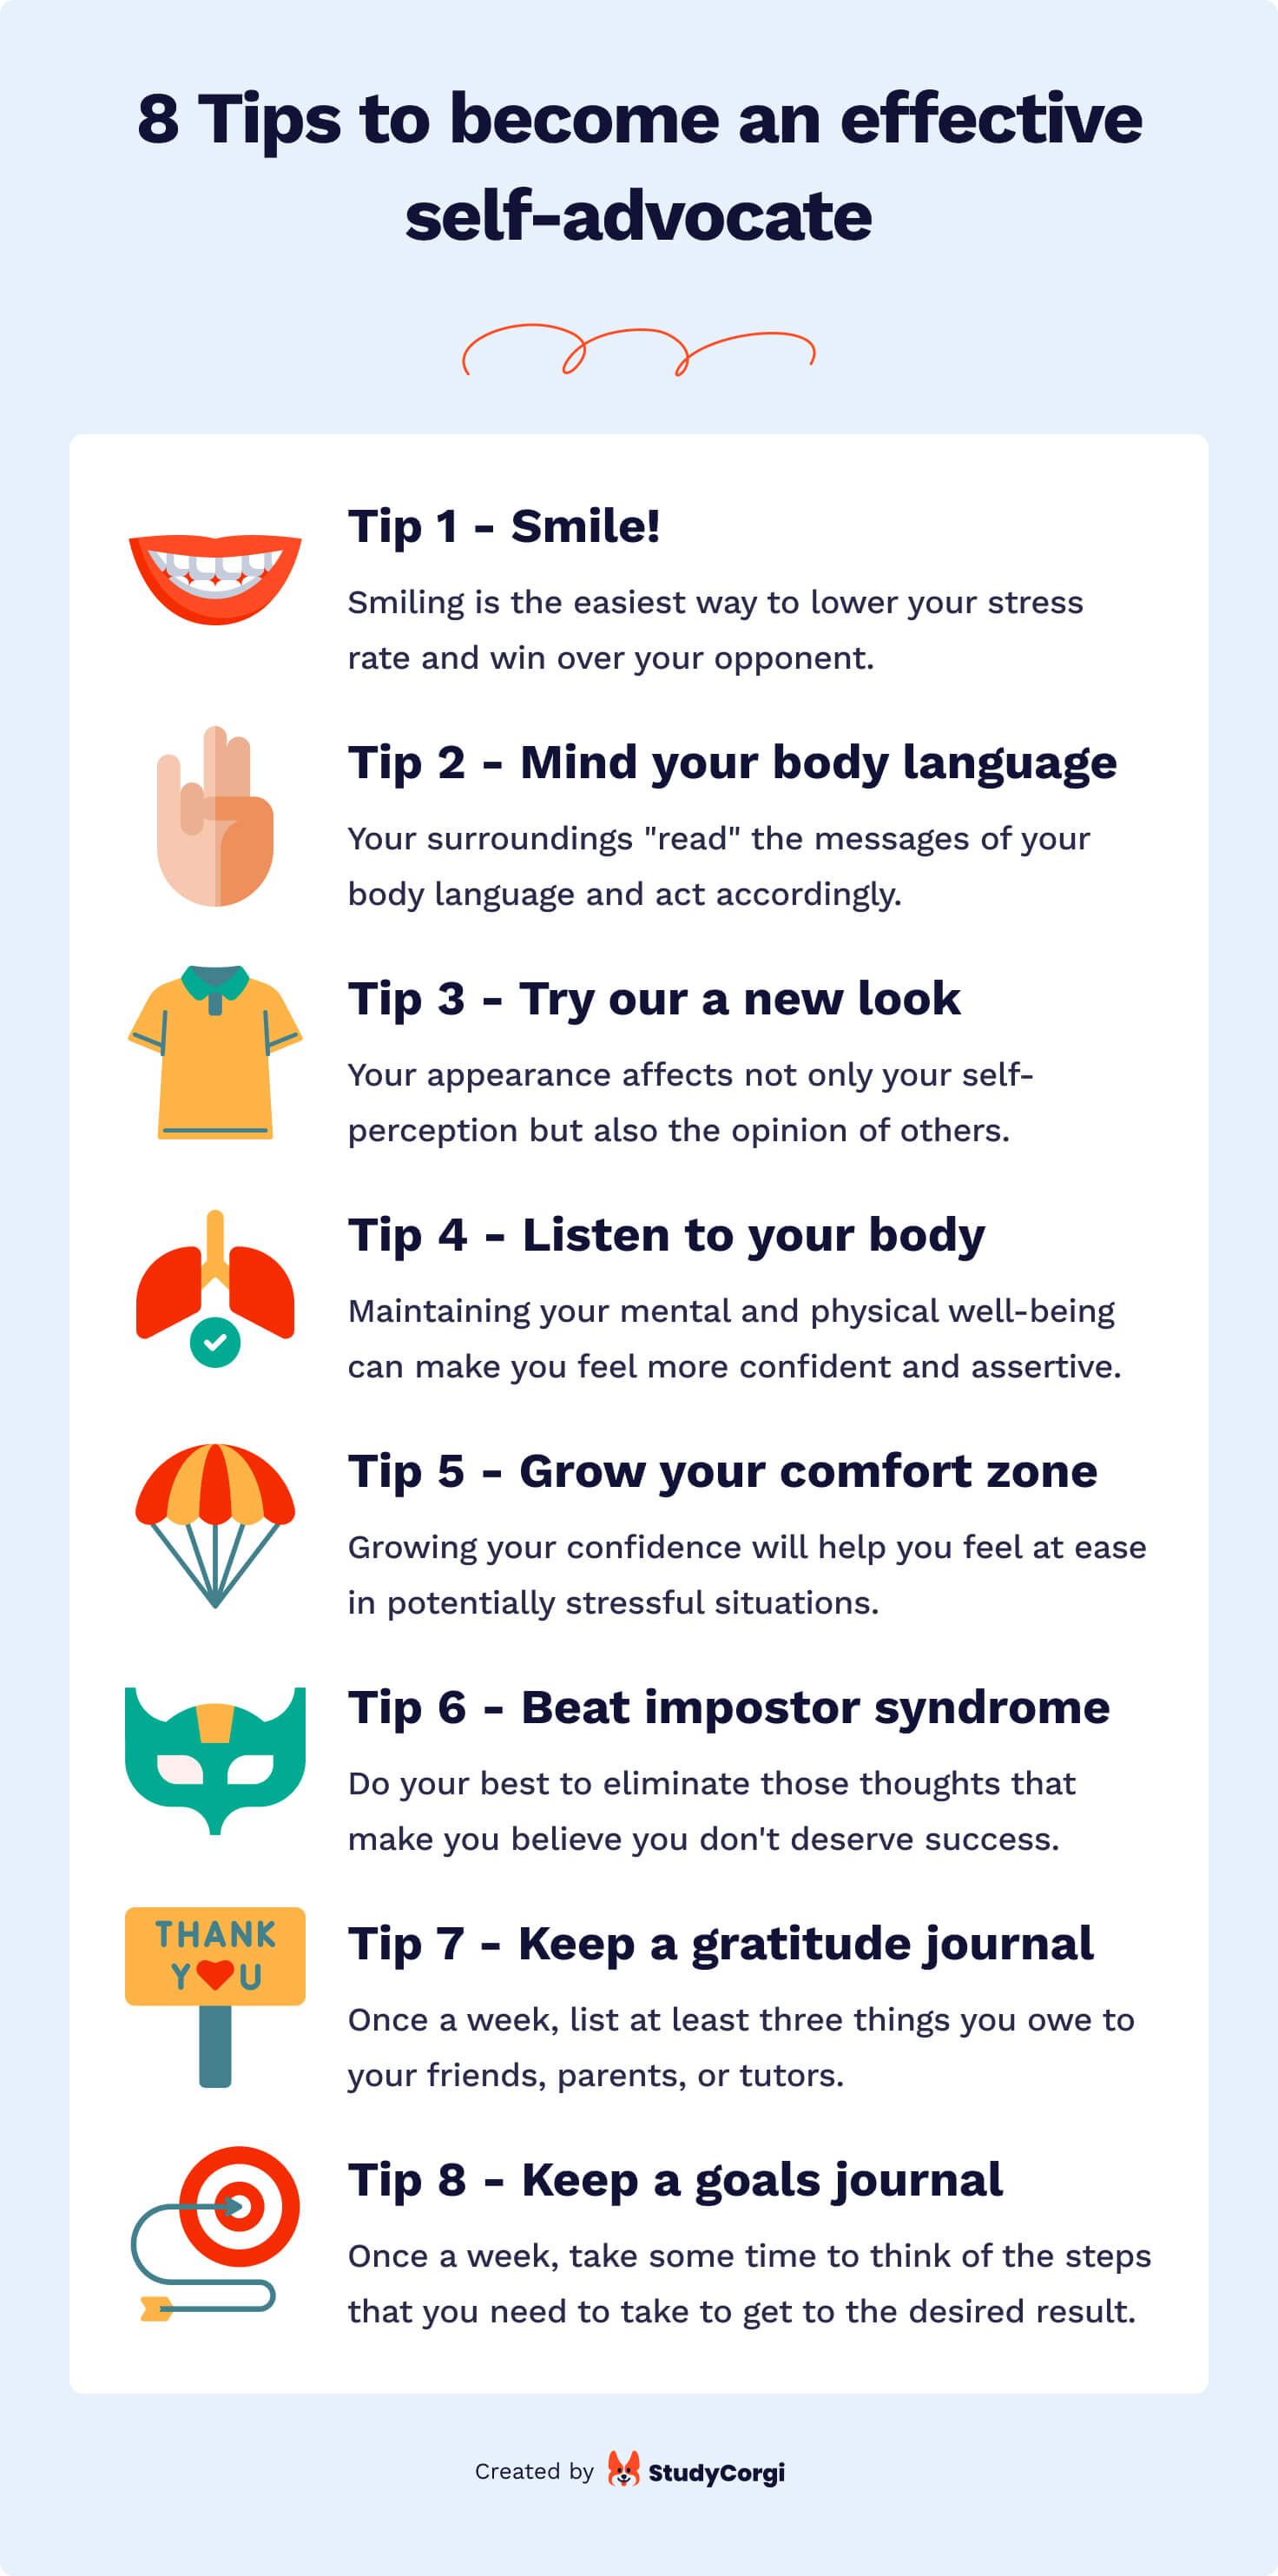 The picture lists 8 tips to become an effective self-advocate.